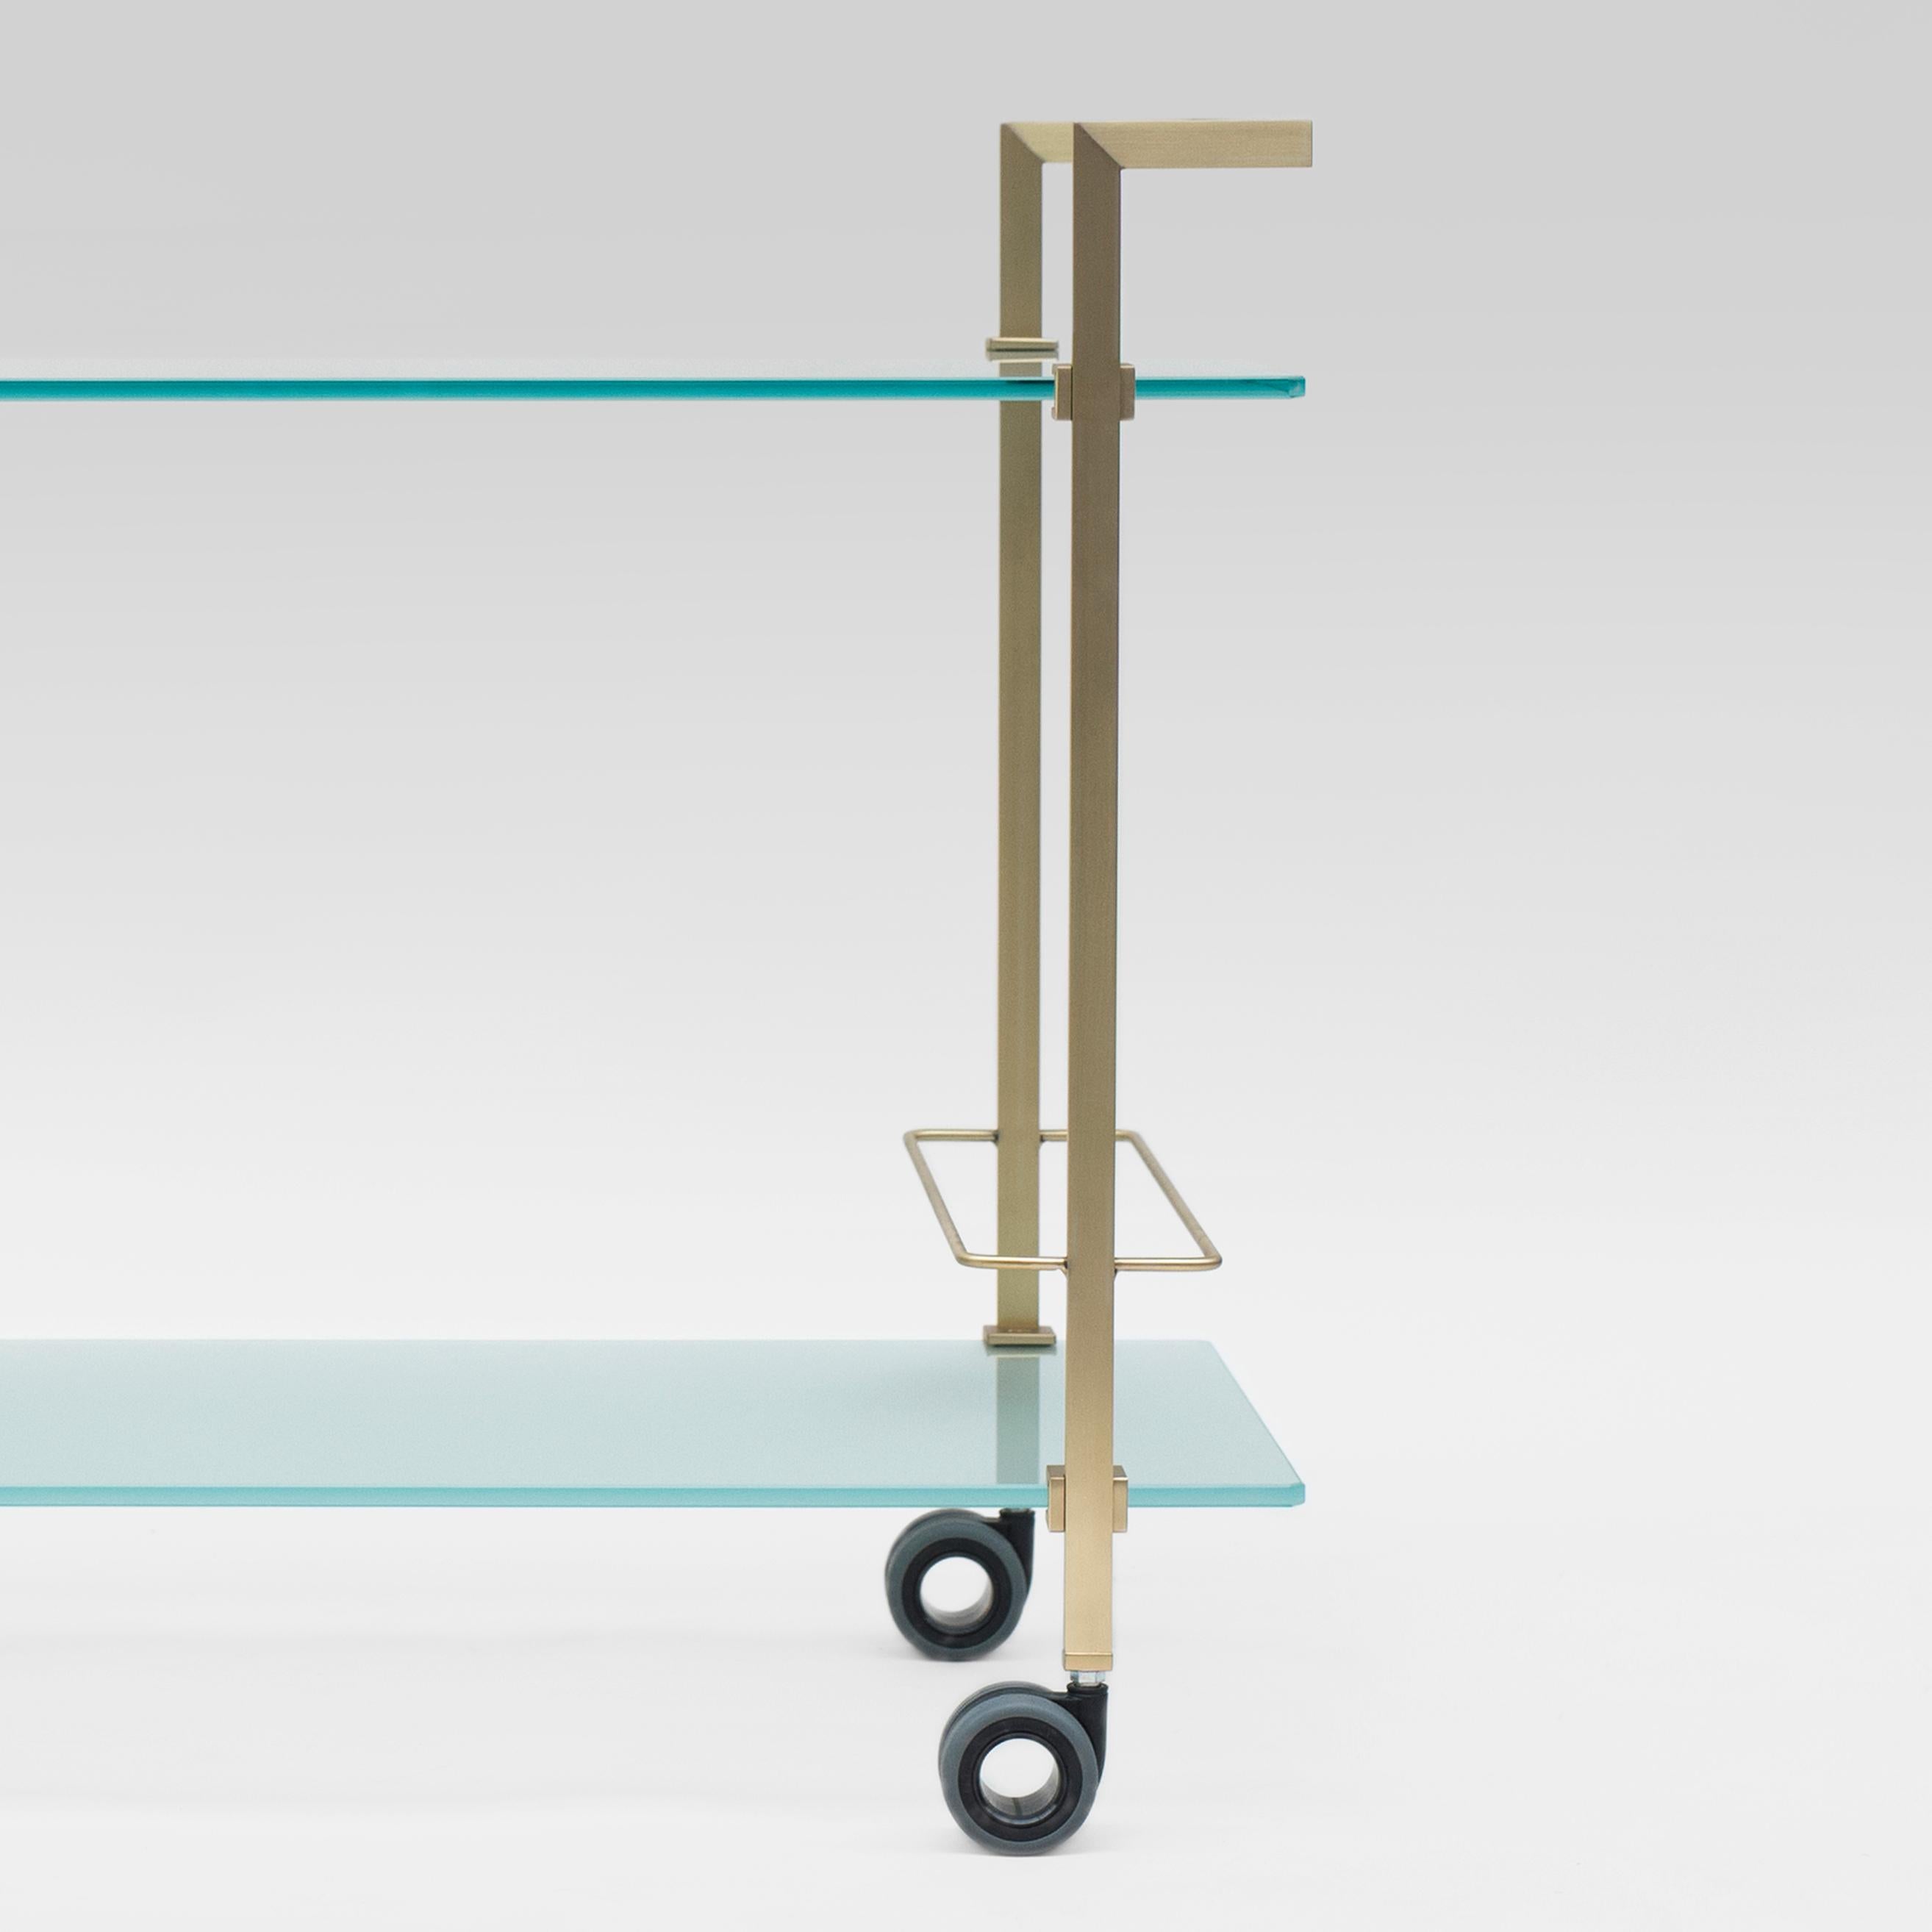 Tea Trolley designed by Peter Ghyczy in 2004.
Manufactured by Ghyczy (Netherlands)

This slender tea trolley is a piece of art on its own. Two tempered glass plates connect the metal frames. Small cast metal details secure the transparent